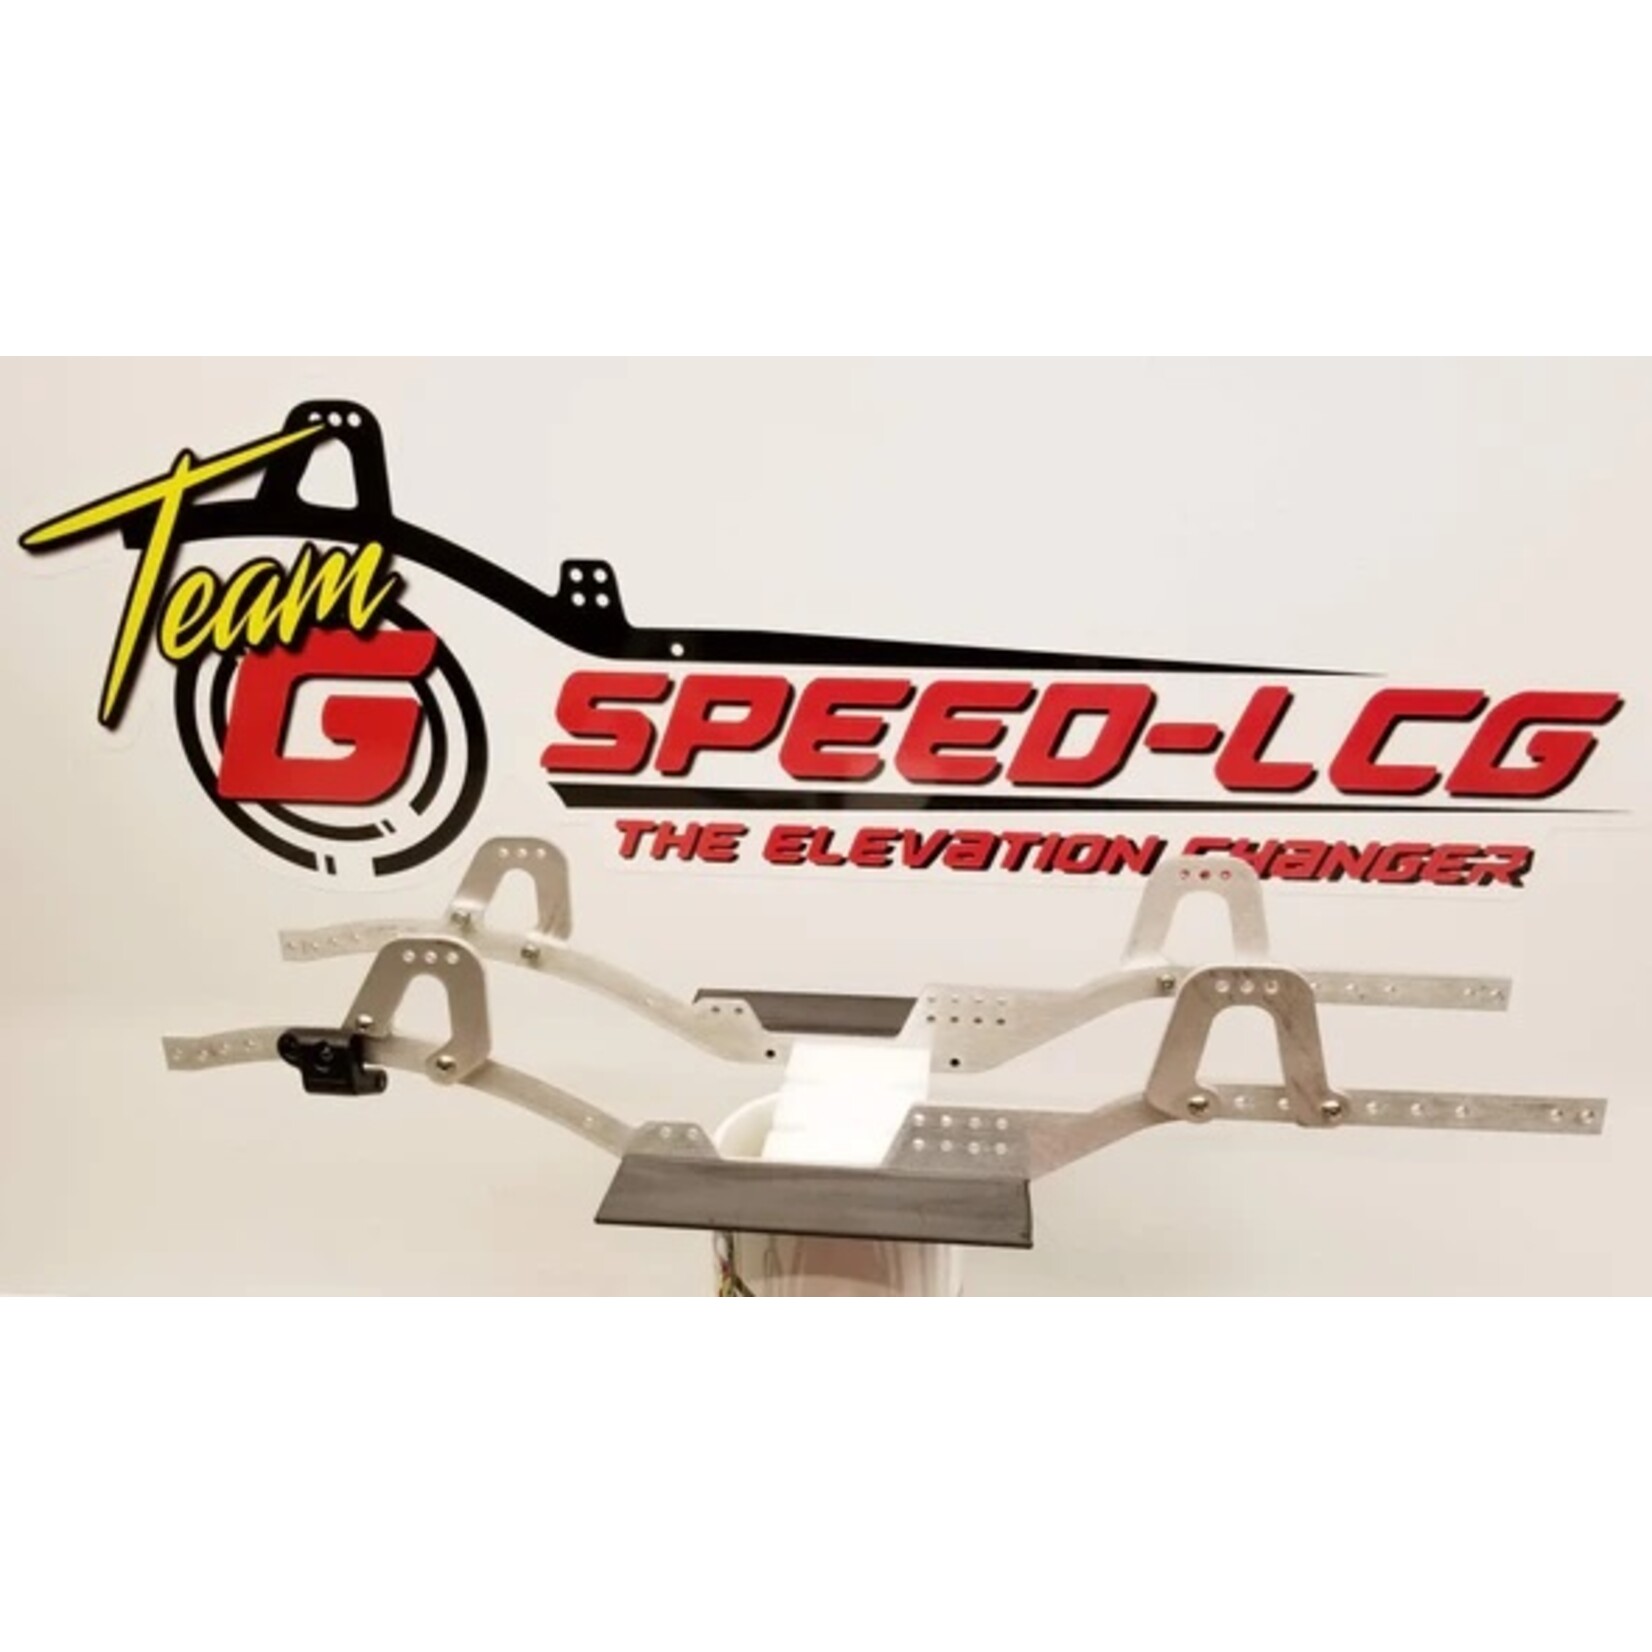 Team G-Speed GSPEED Chassis V1-C1 Electronics Tray Sliders